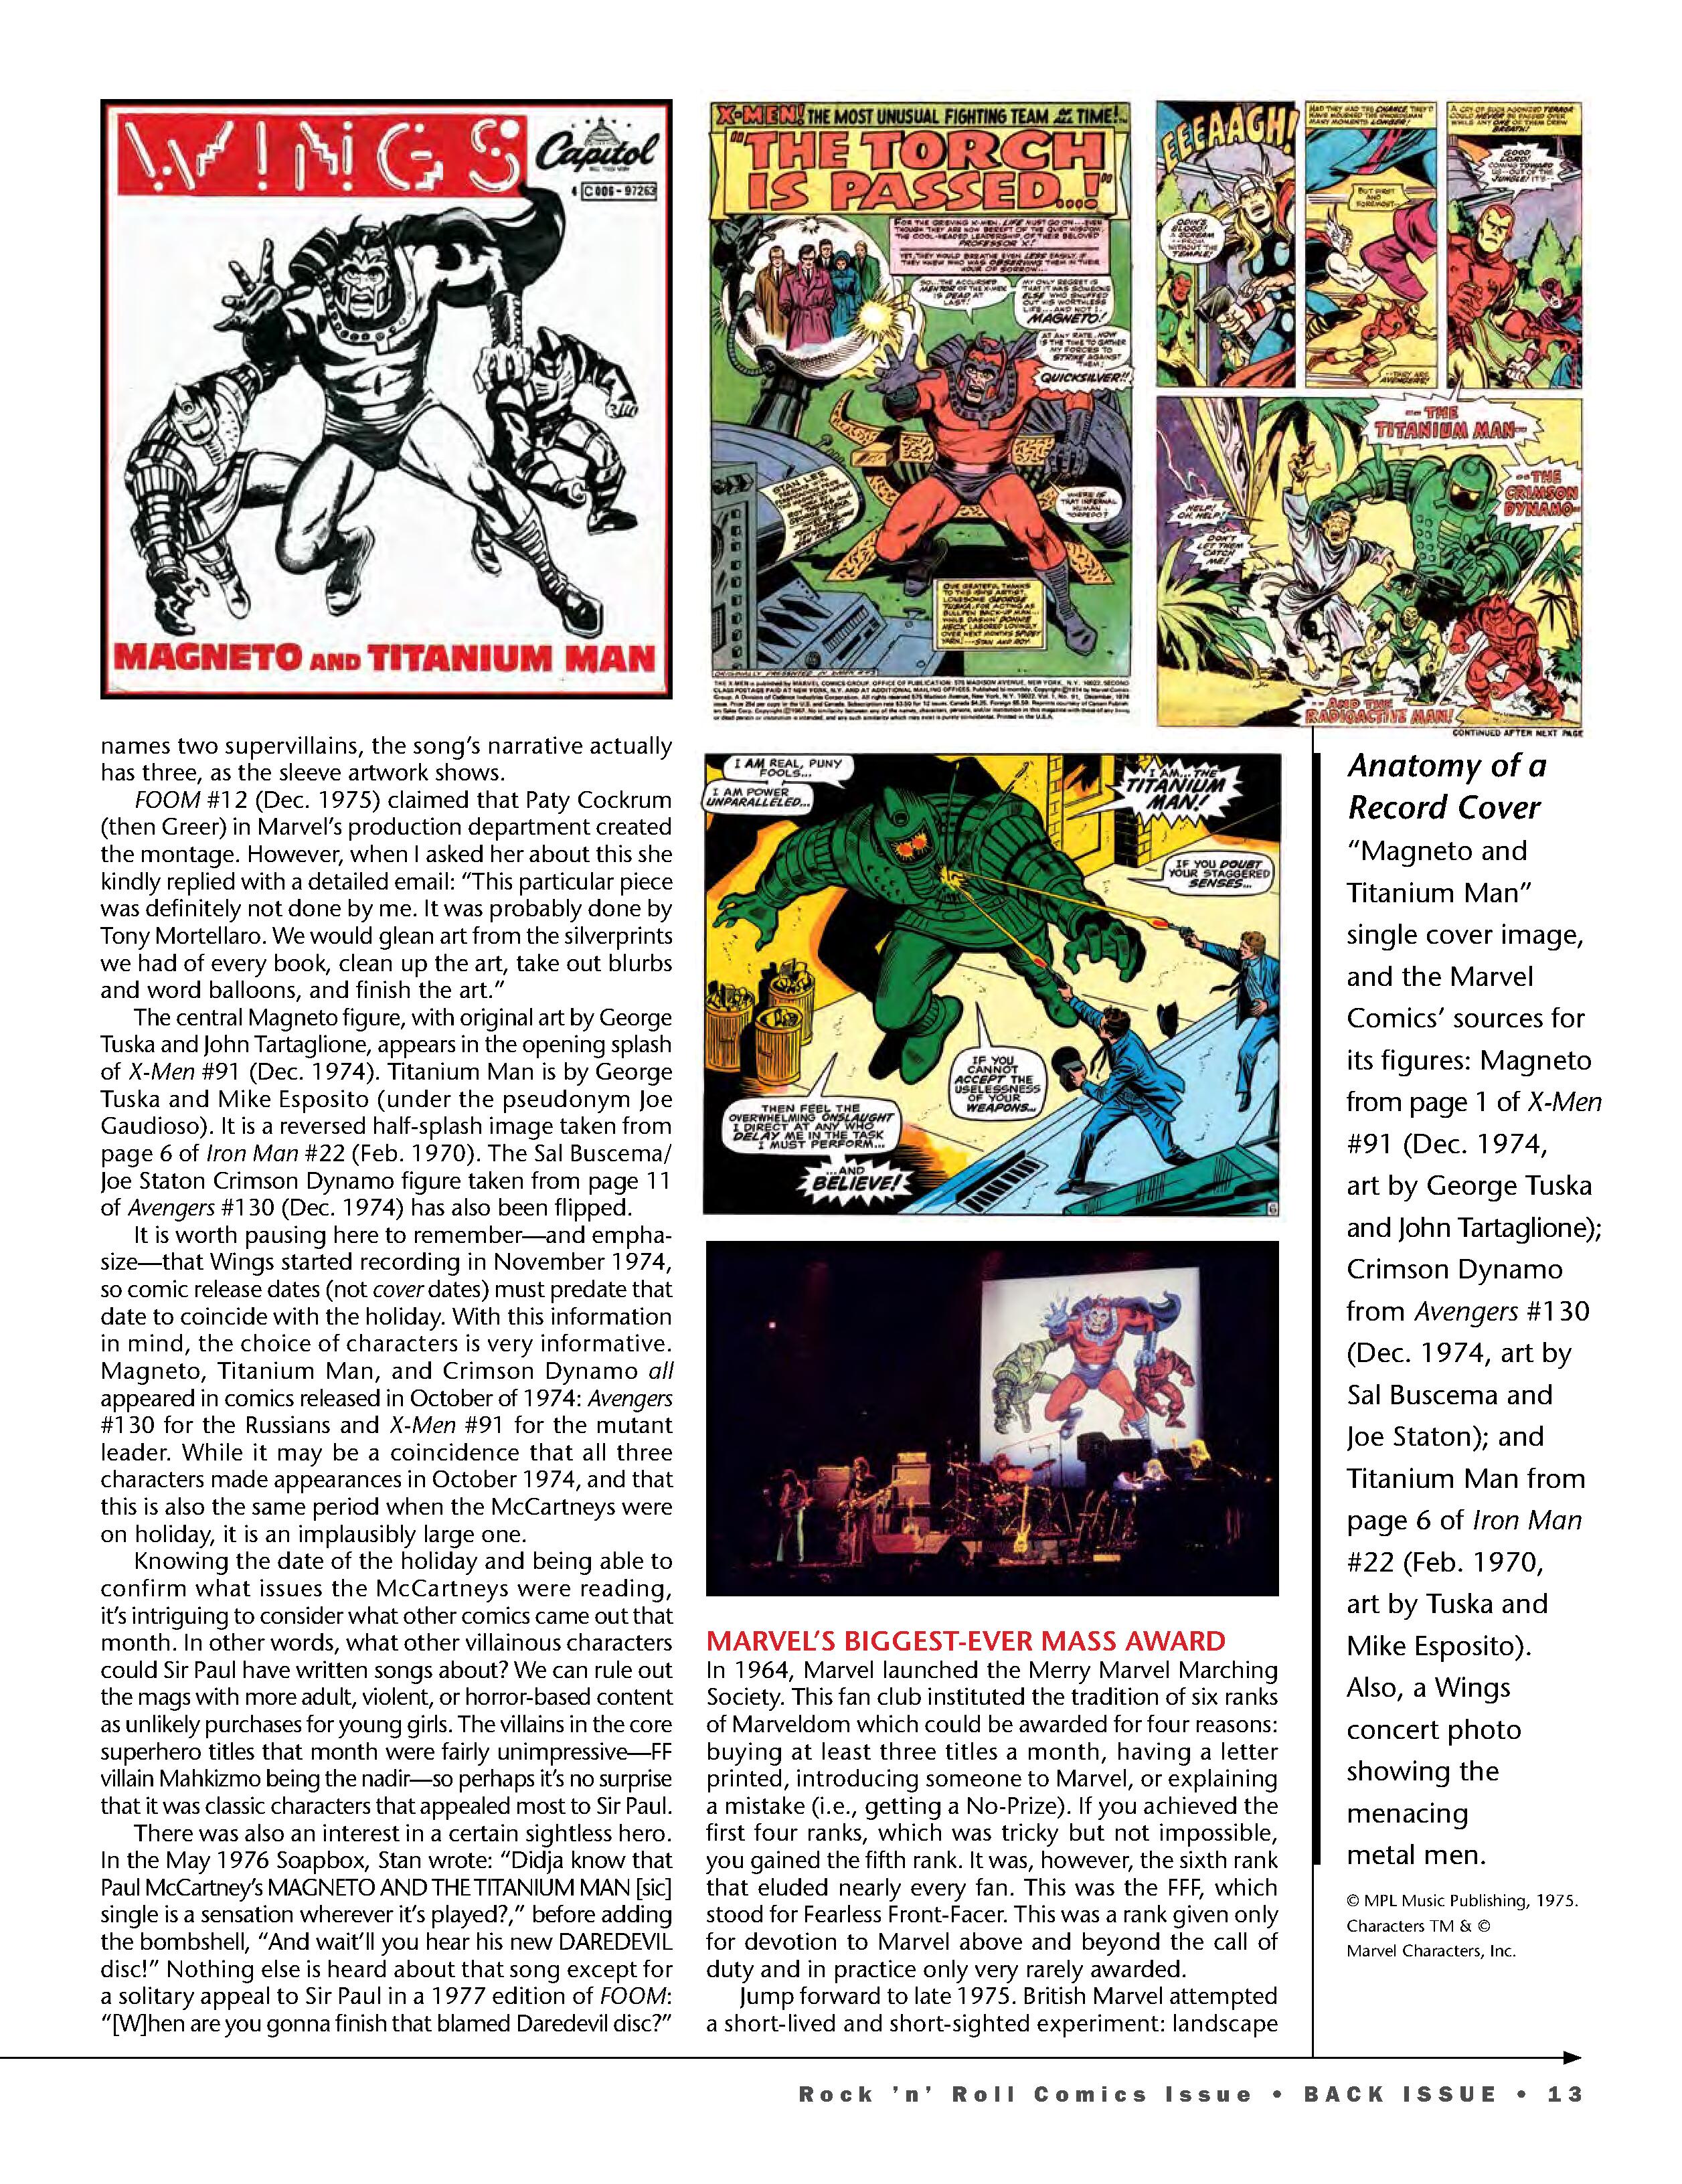 Read online Back Issue comic -  Issue #101 - 15